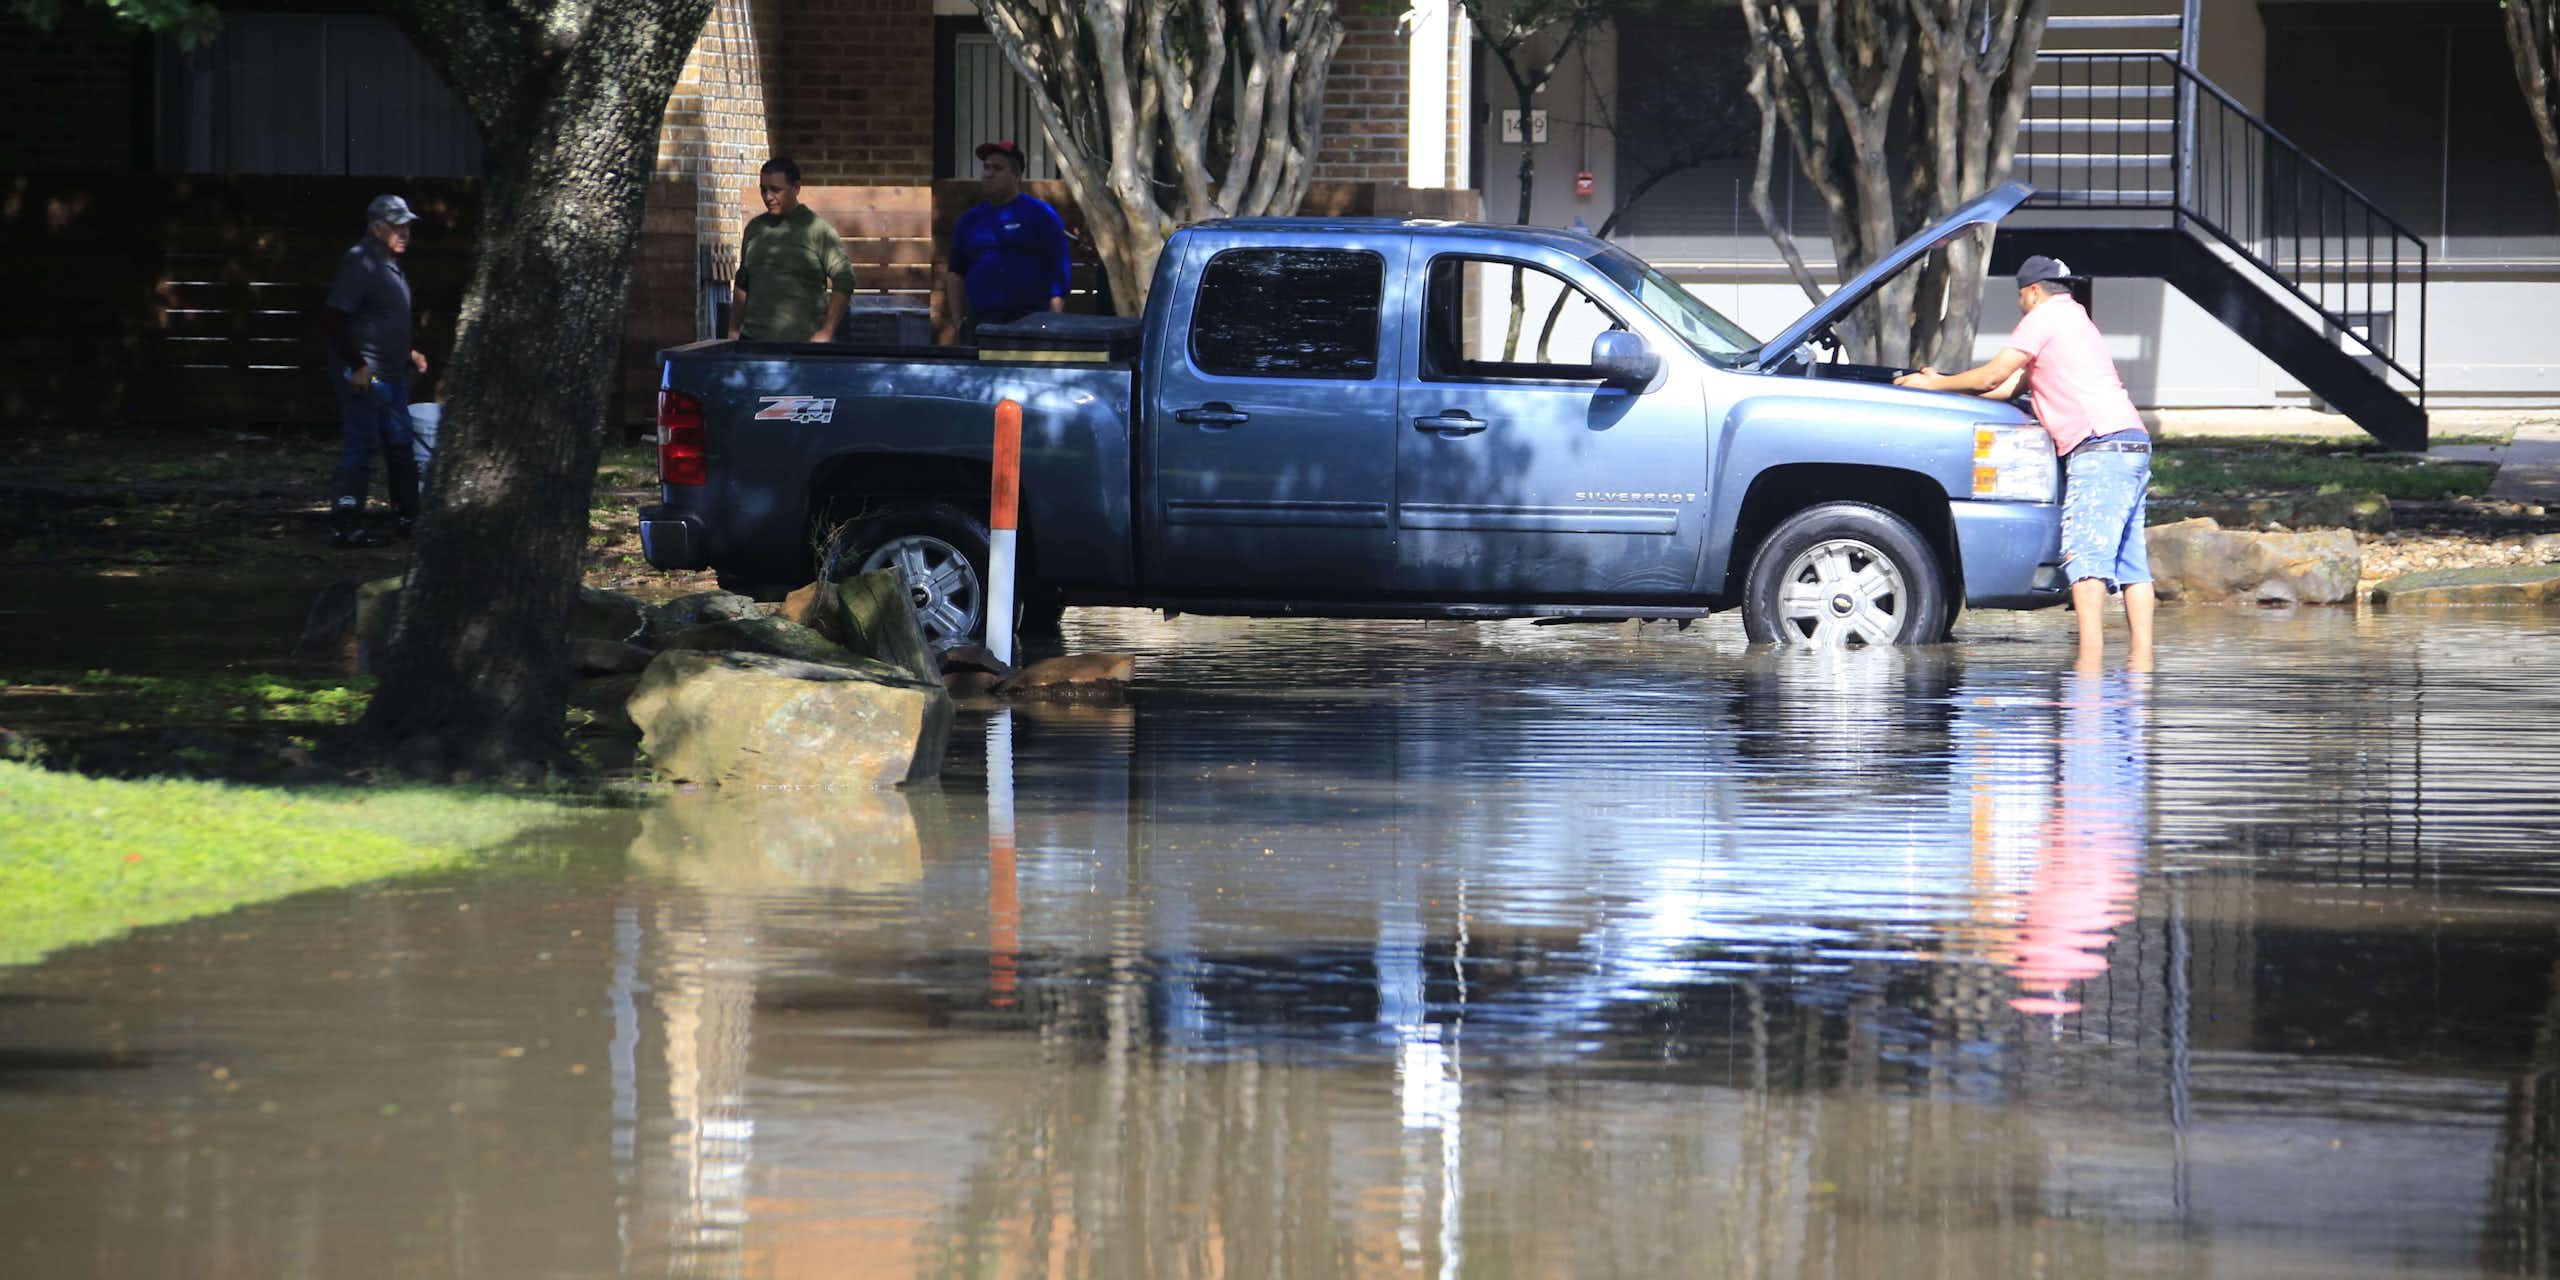 A man works on the engine of a truck while standing in floodwater over his ankles outside a home.